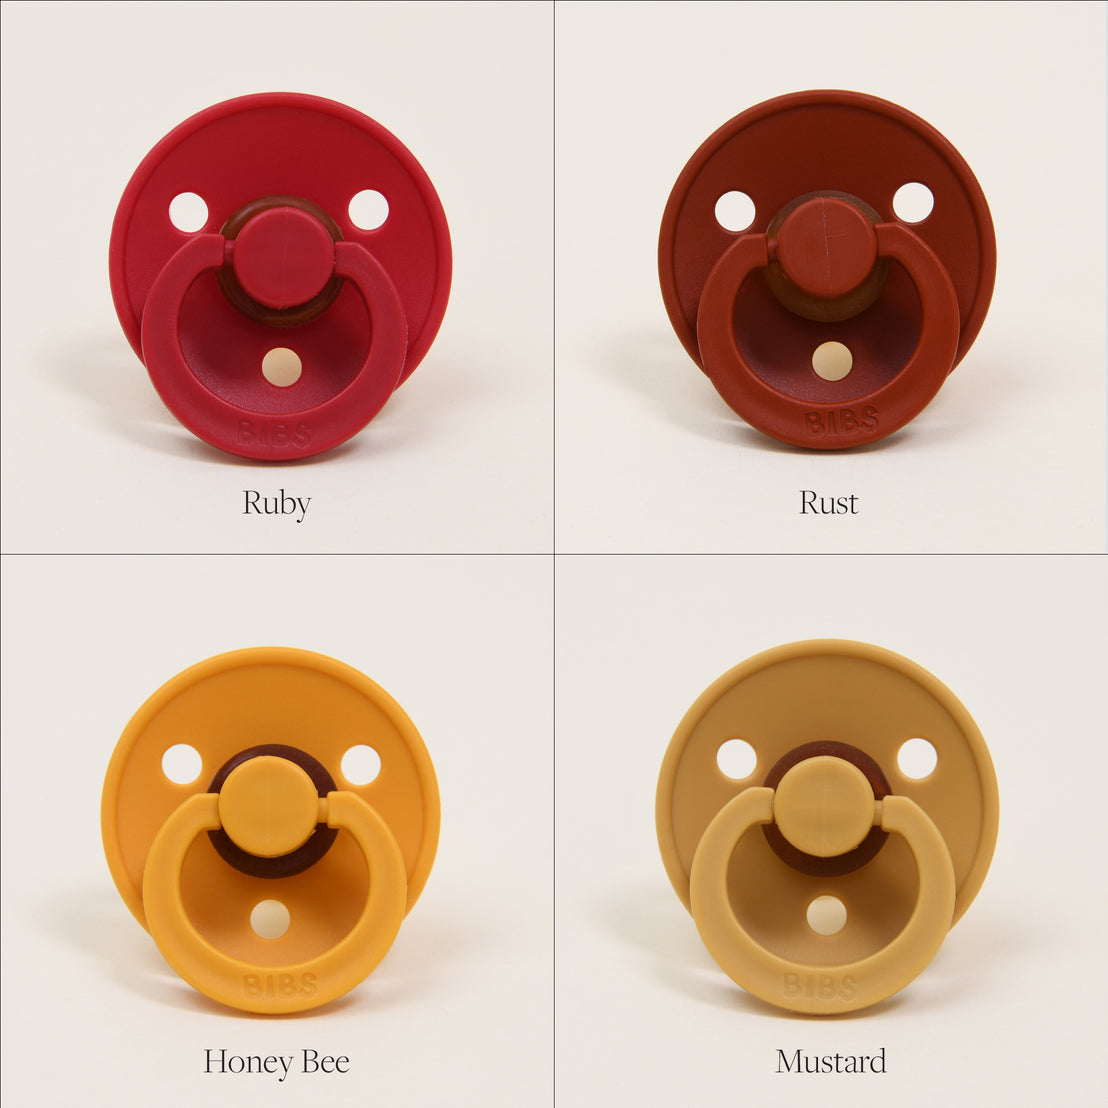 Four colorful Bibs Pacifiers against a white background, displayed in squares. Top left: ruby (red), top right: rust (brown), bottom left: honey bee (yellow), bottom right: